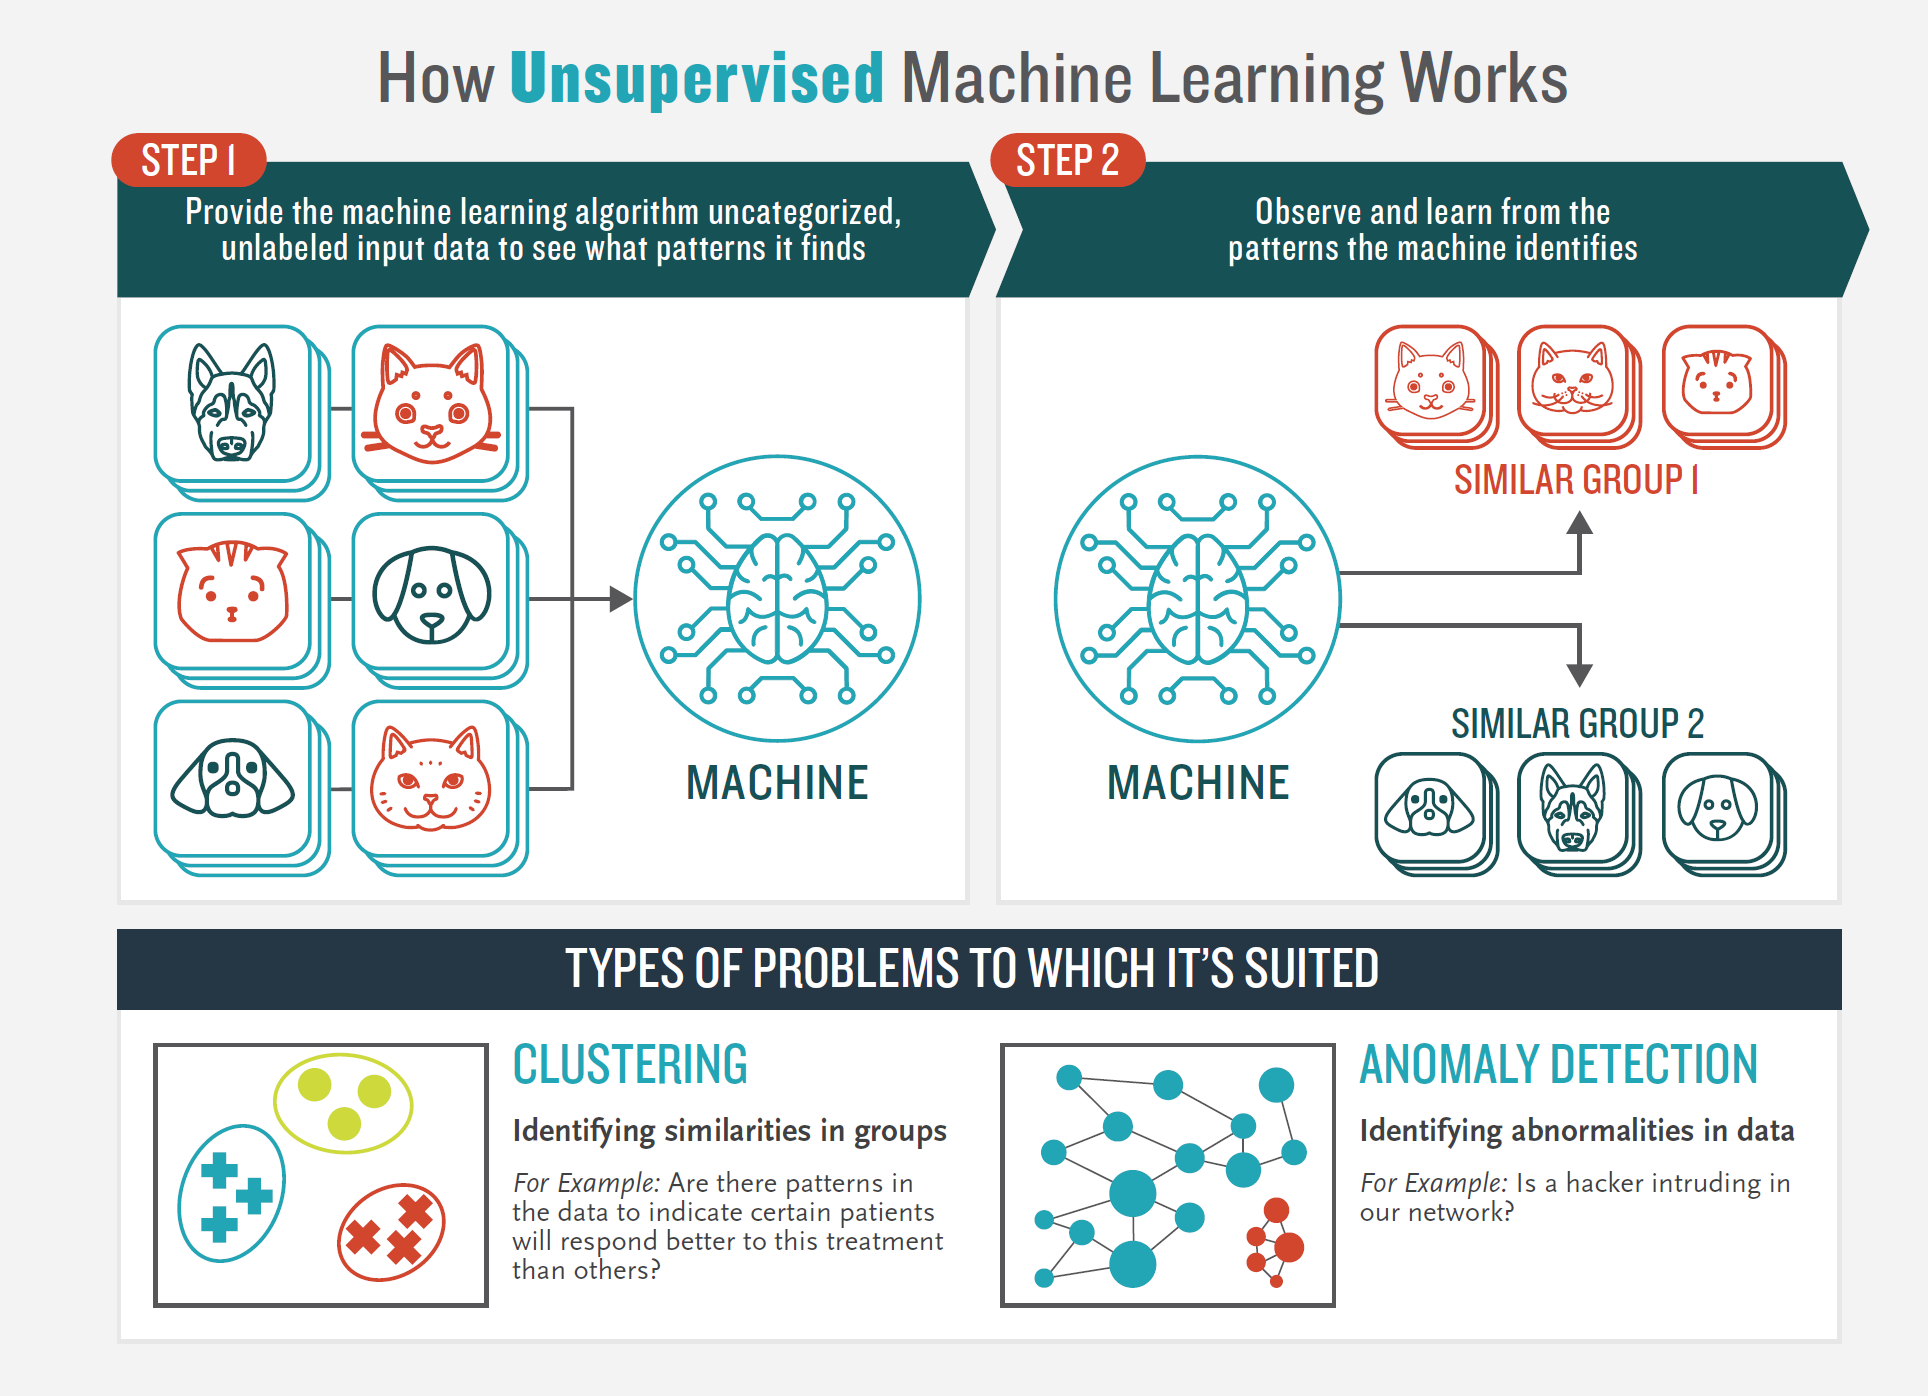 How unsupervised machine learning works